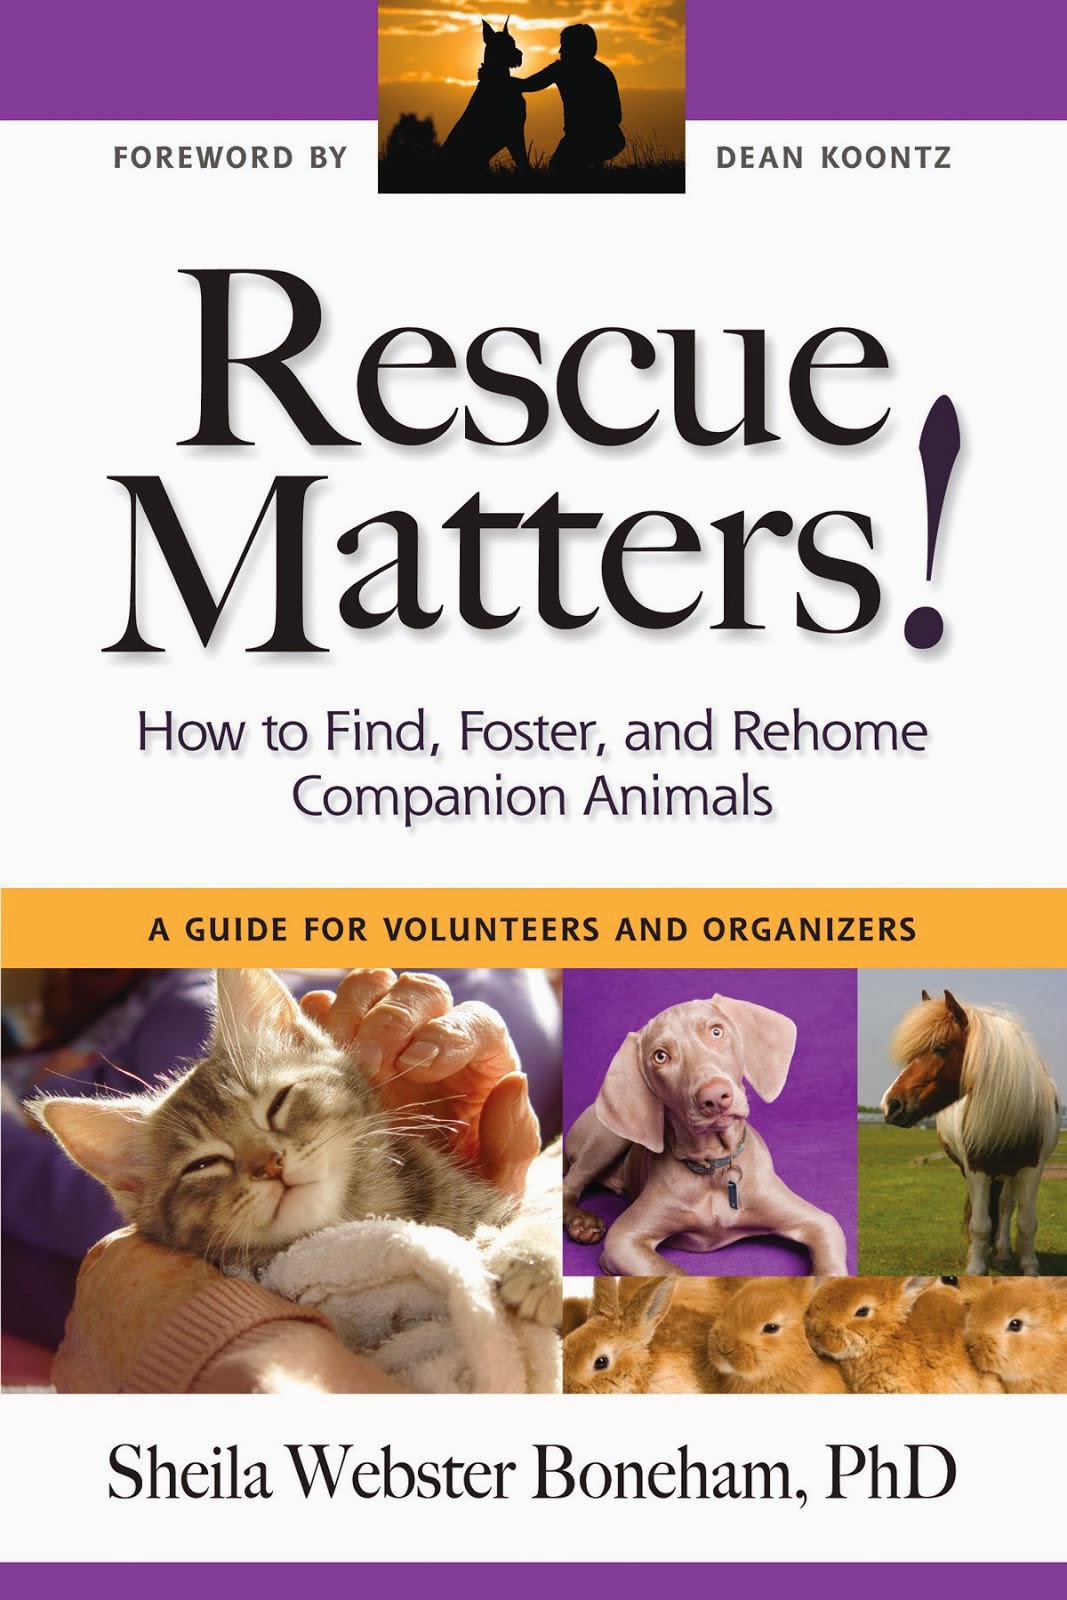 Rescue Matters: How to Find, Foster, and Rehome Companion Animals